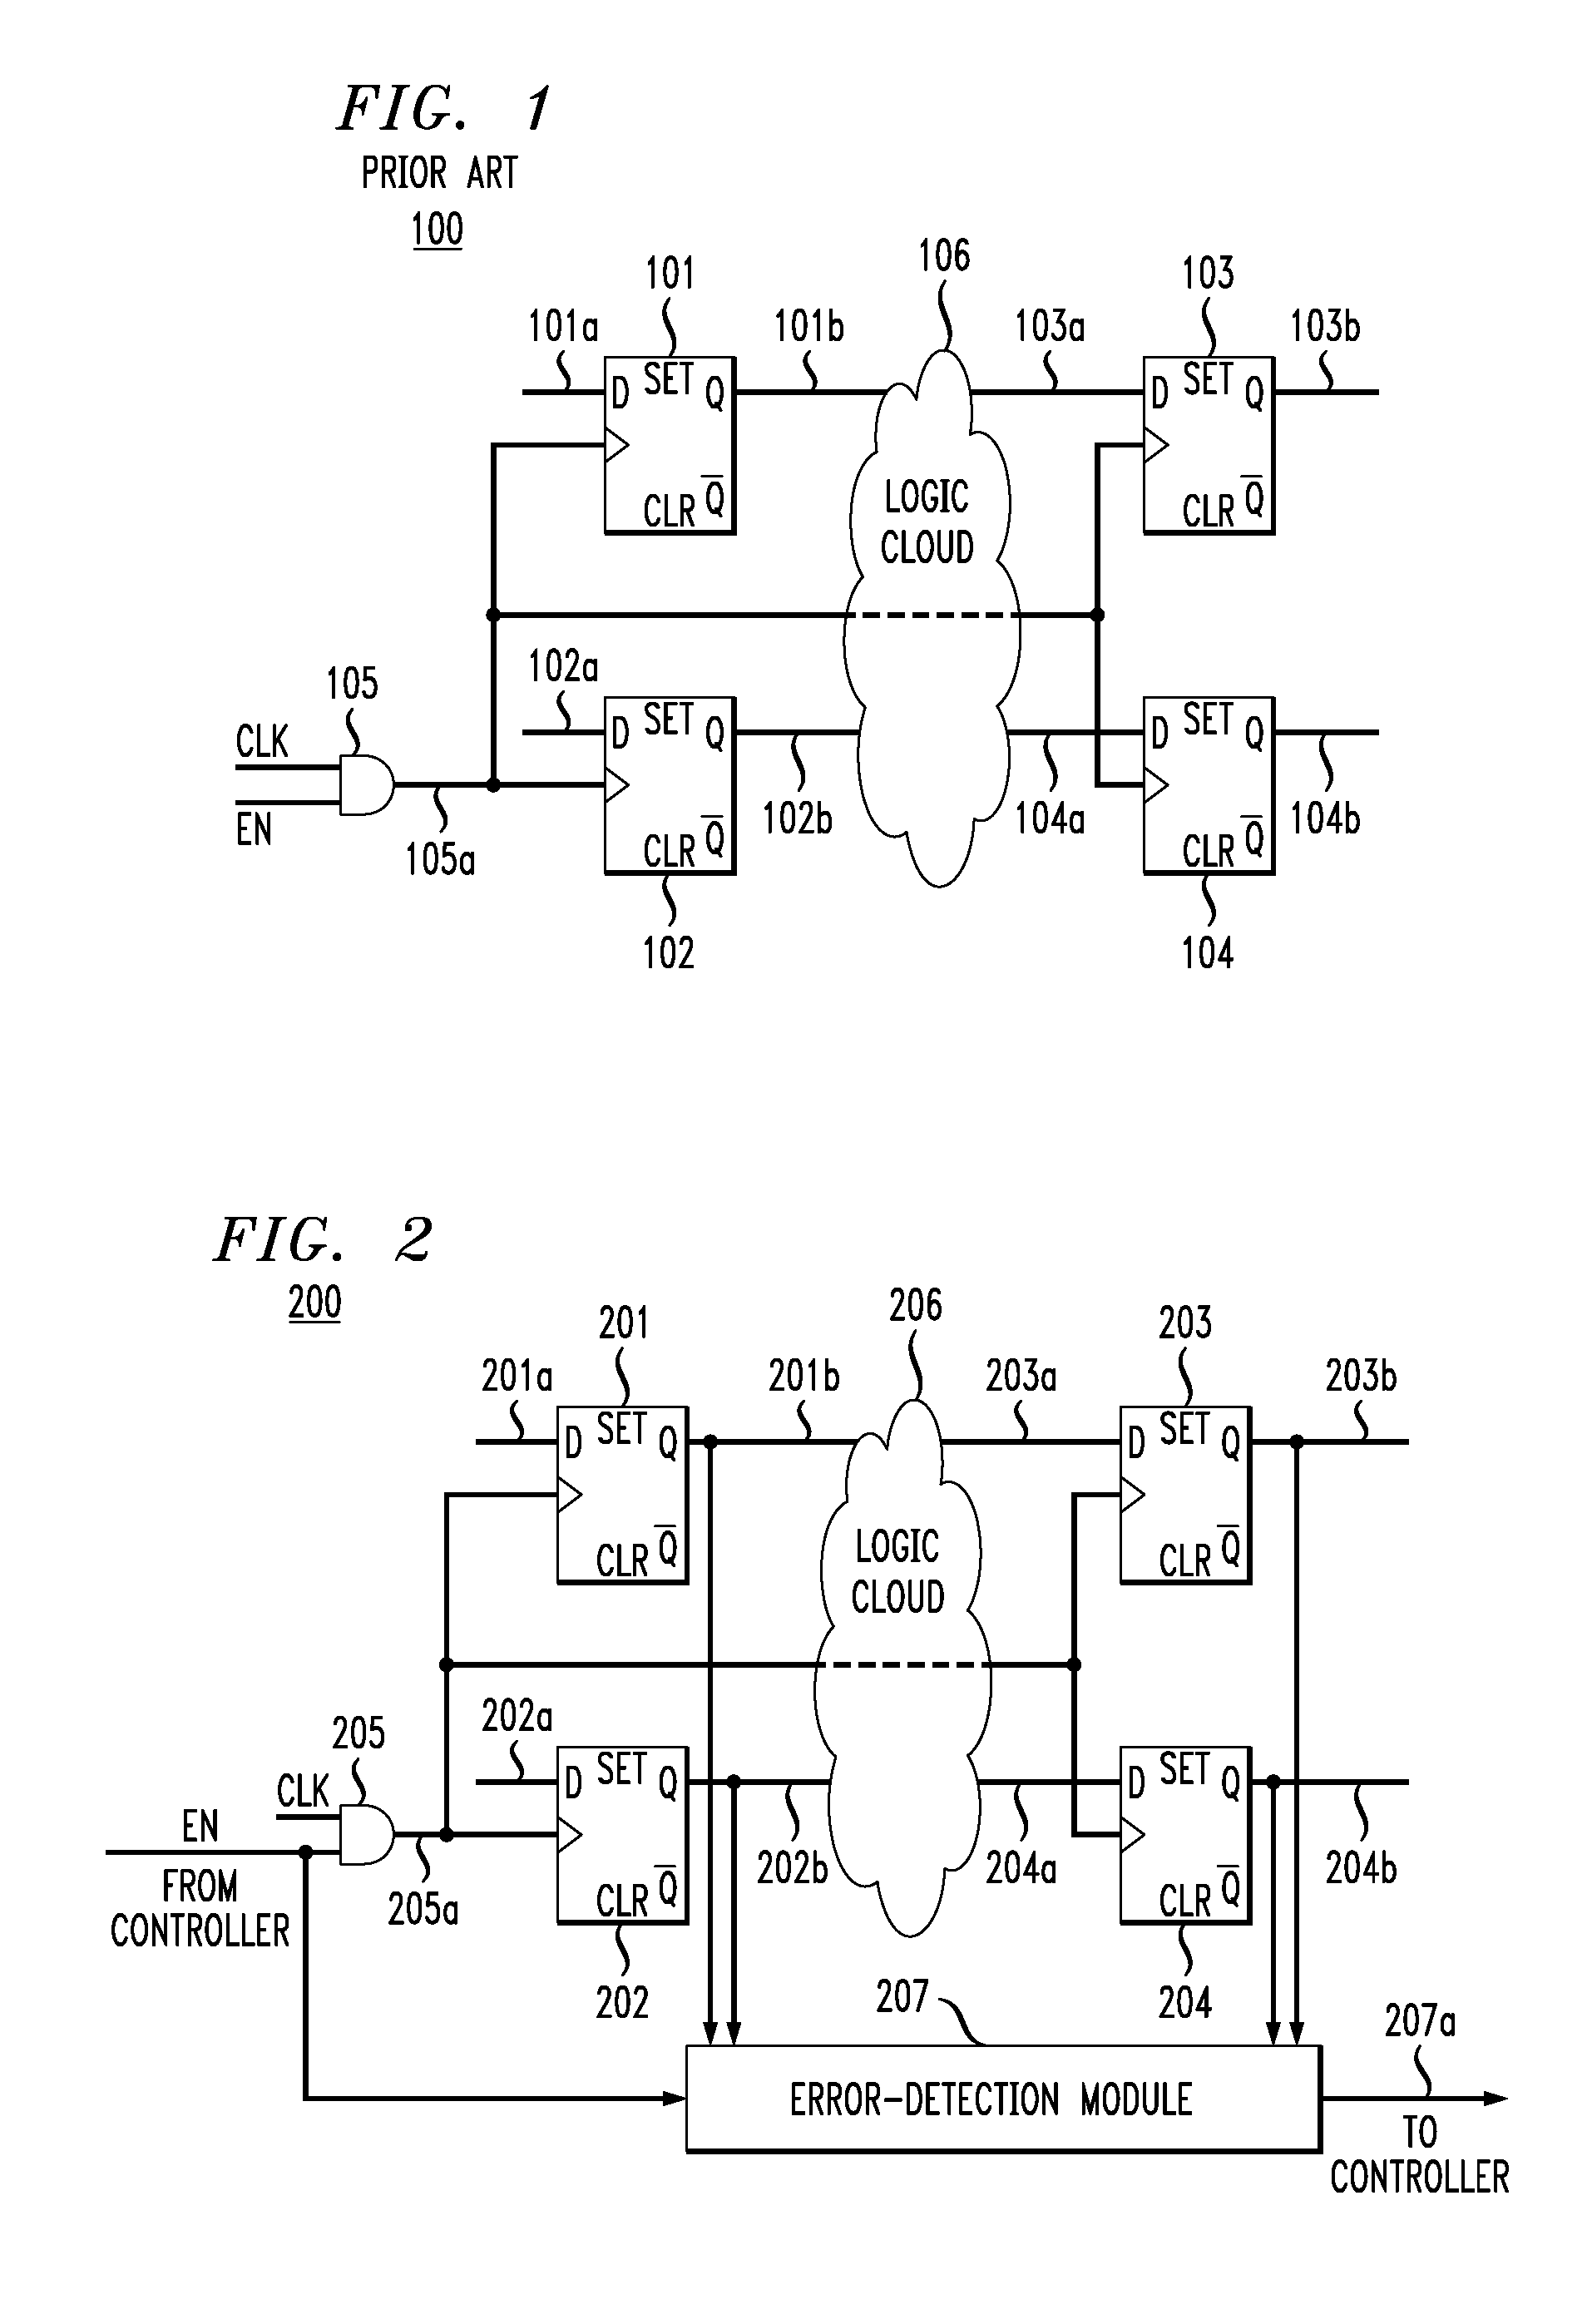 Soft-error detection for electronic-circuit registers